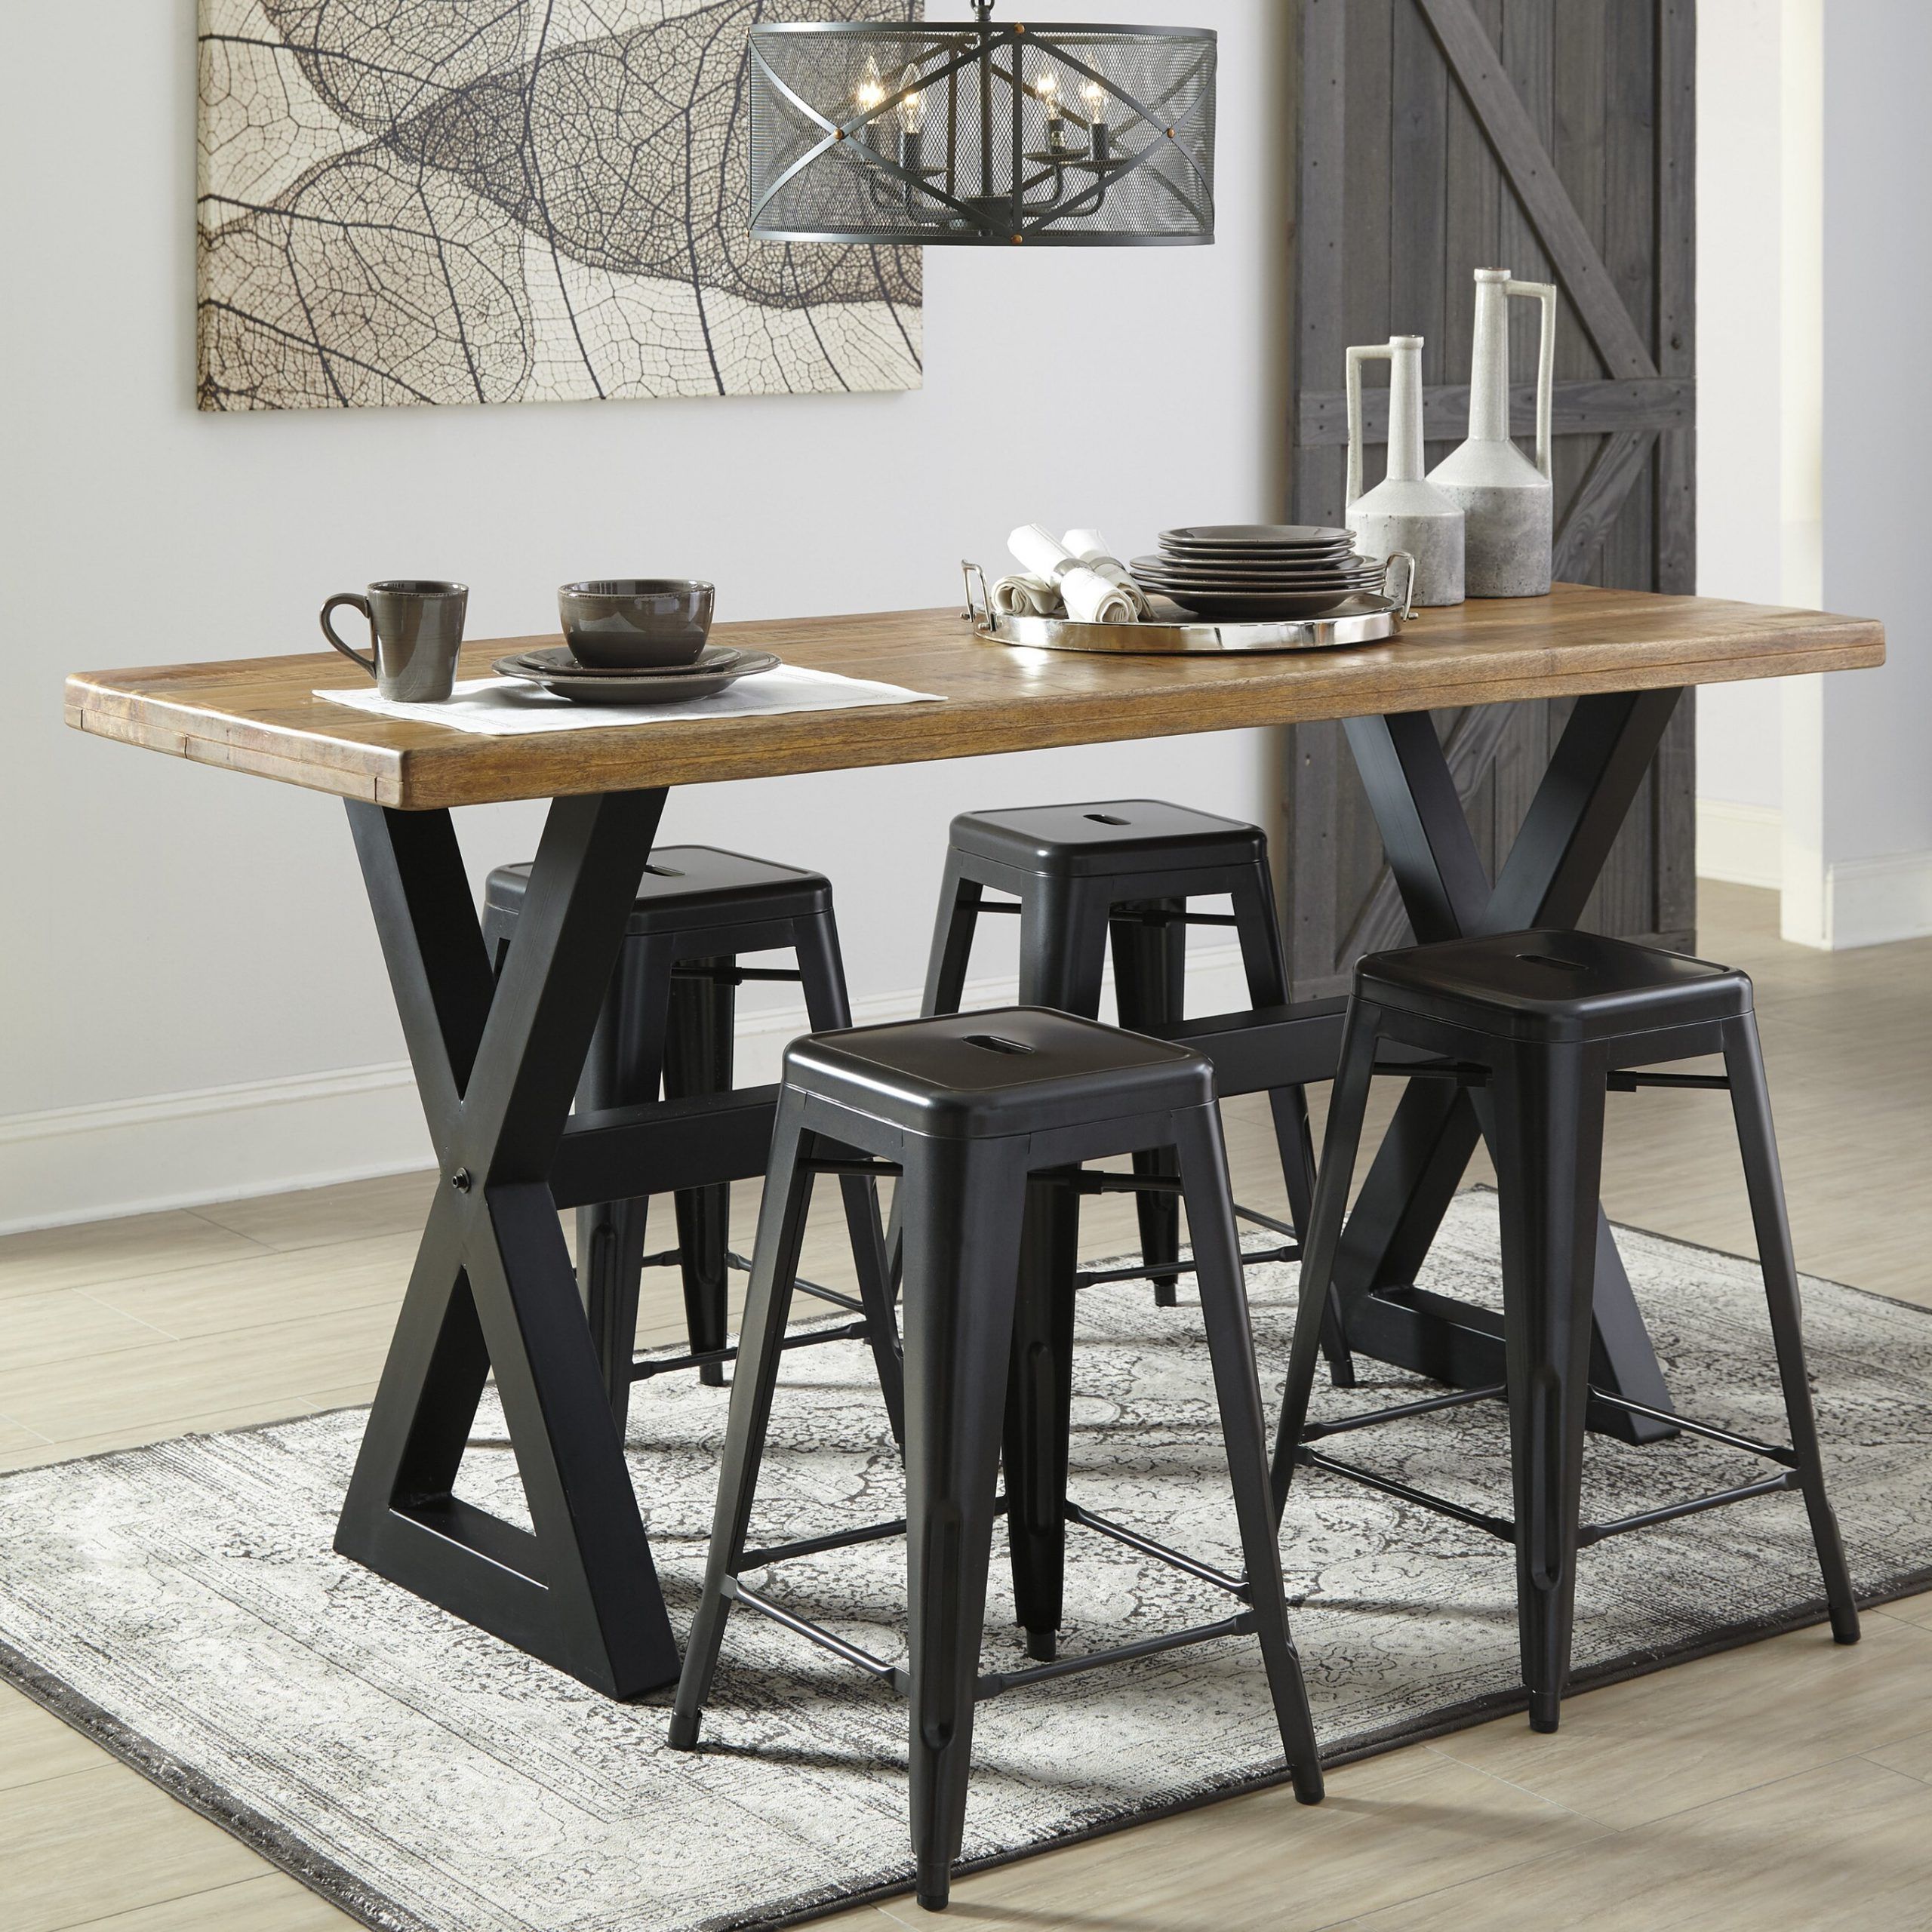 Laurel Foundry Modern Farmhouse Fabien Counter Height Regarding Favorite Counter Height Dining Tables (View 3 of 20)